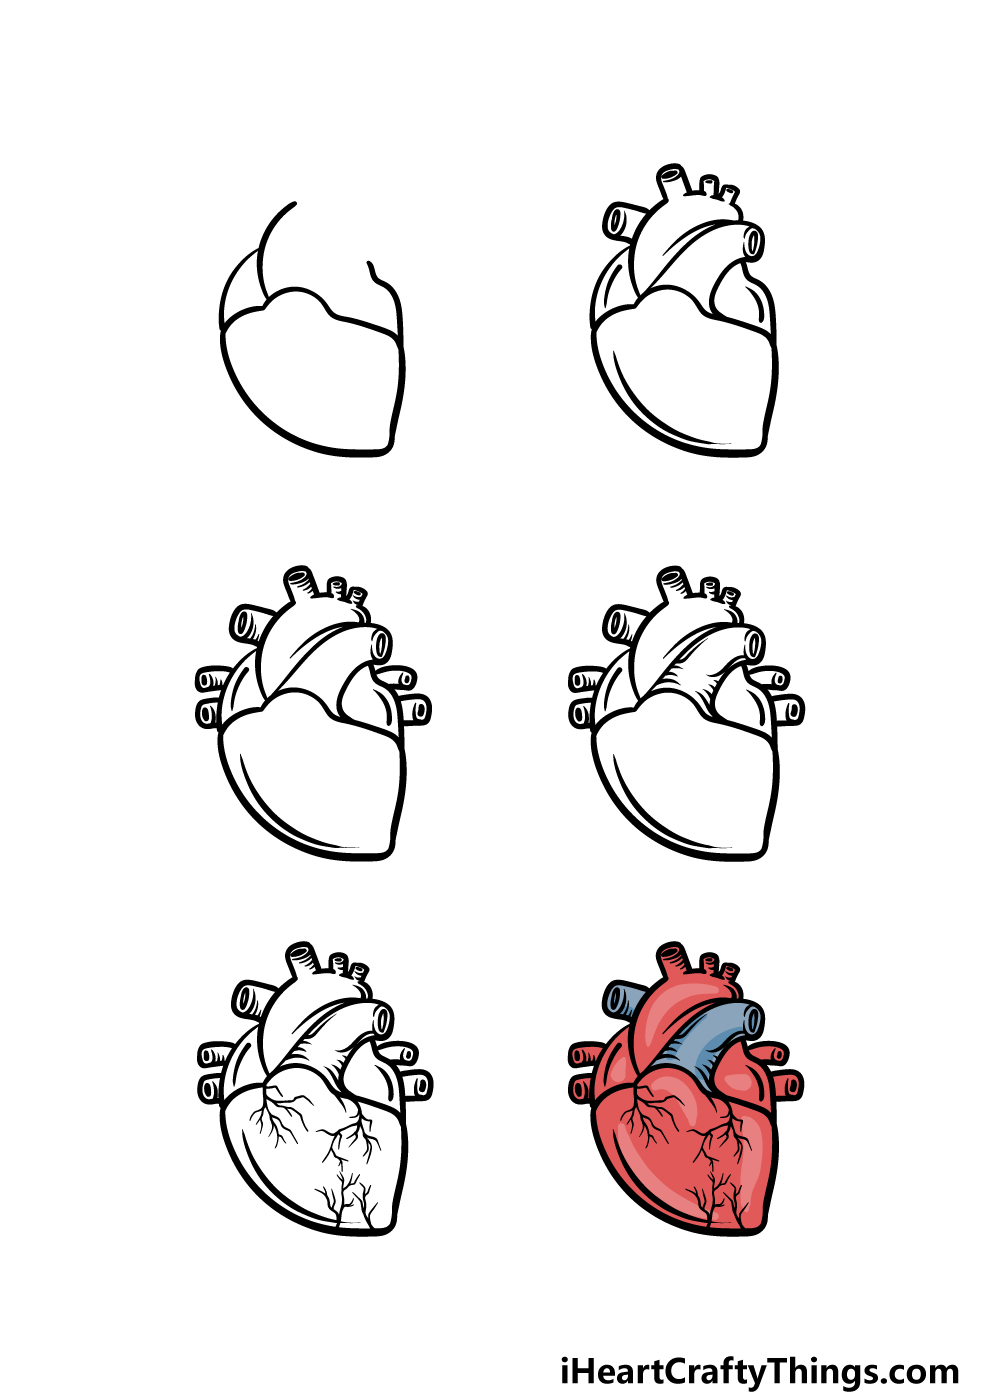 Cartoon Heart Drawing - How To Draw A Cartoon Heart Step By Step